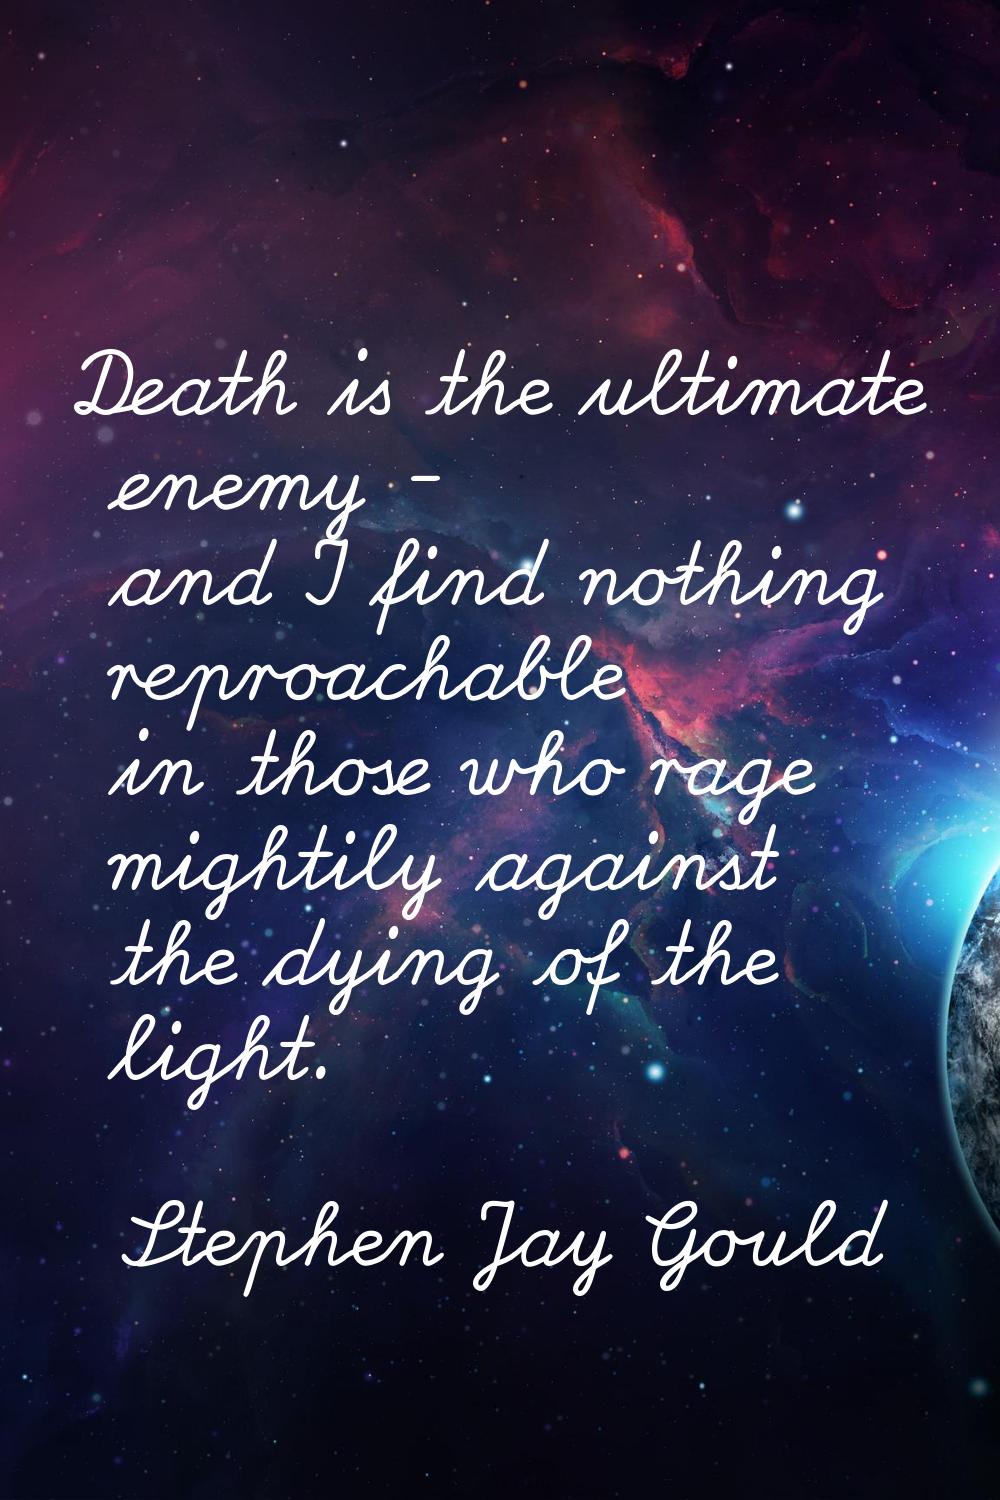 Death is the ultimate enemy - and I find nothing reproachable in those who rage mightily against th